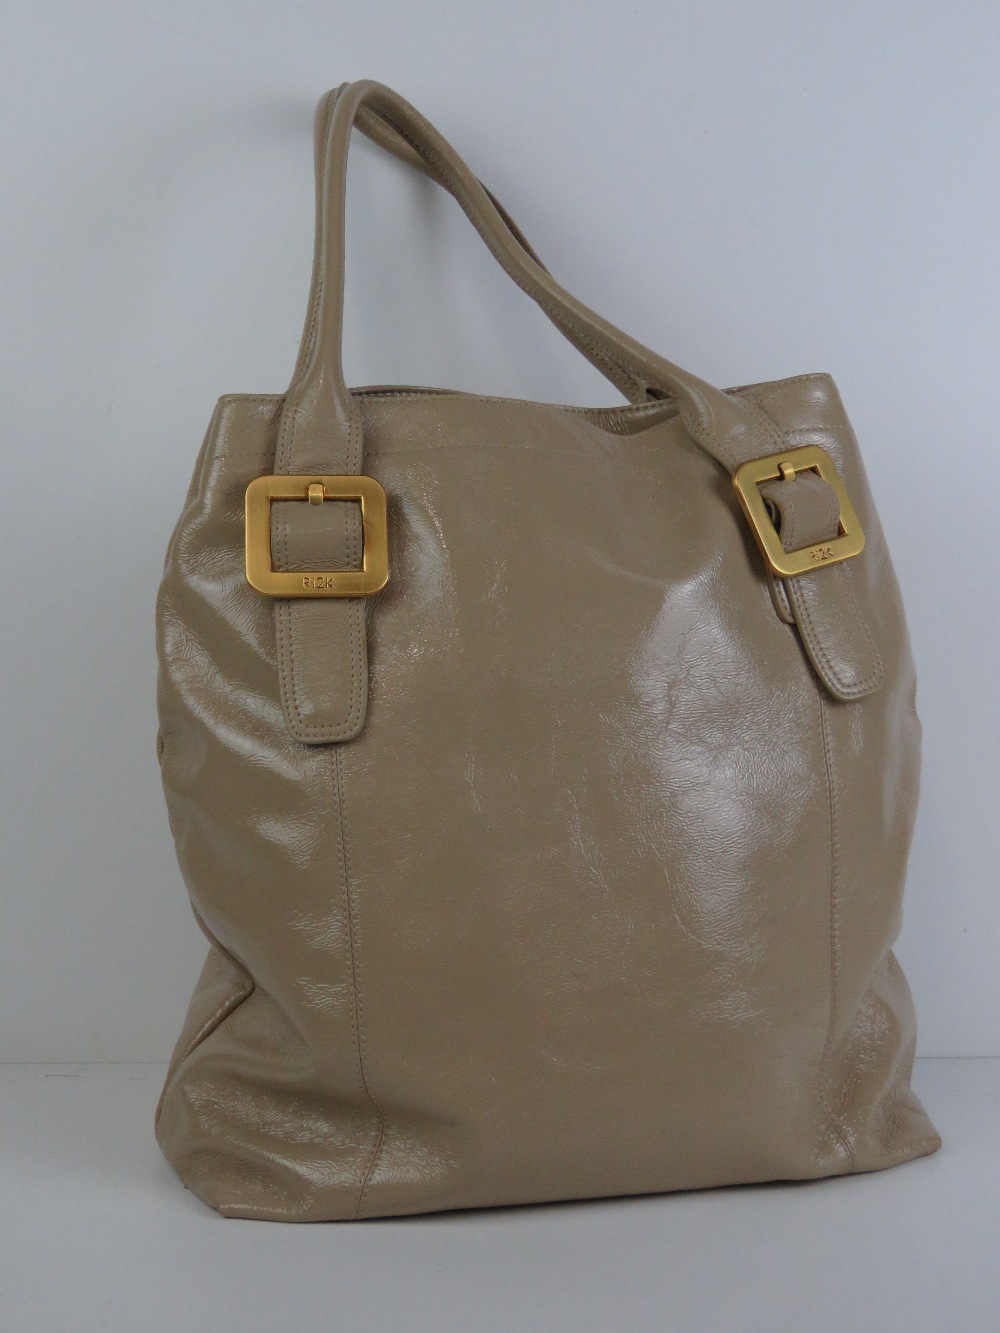 Ri2K; a beige patent ladies handbag, 100% leather outer, with dustbag, approx 17" high x 13" wide. - Image 3 of 6